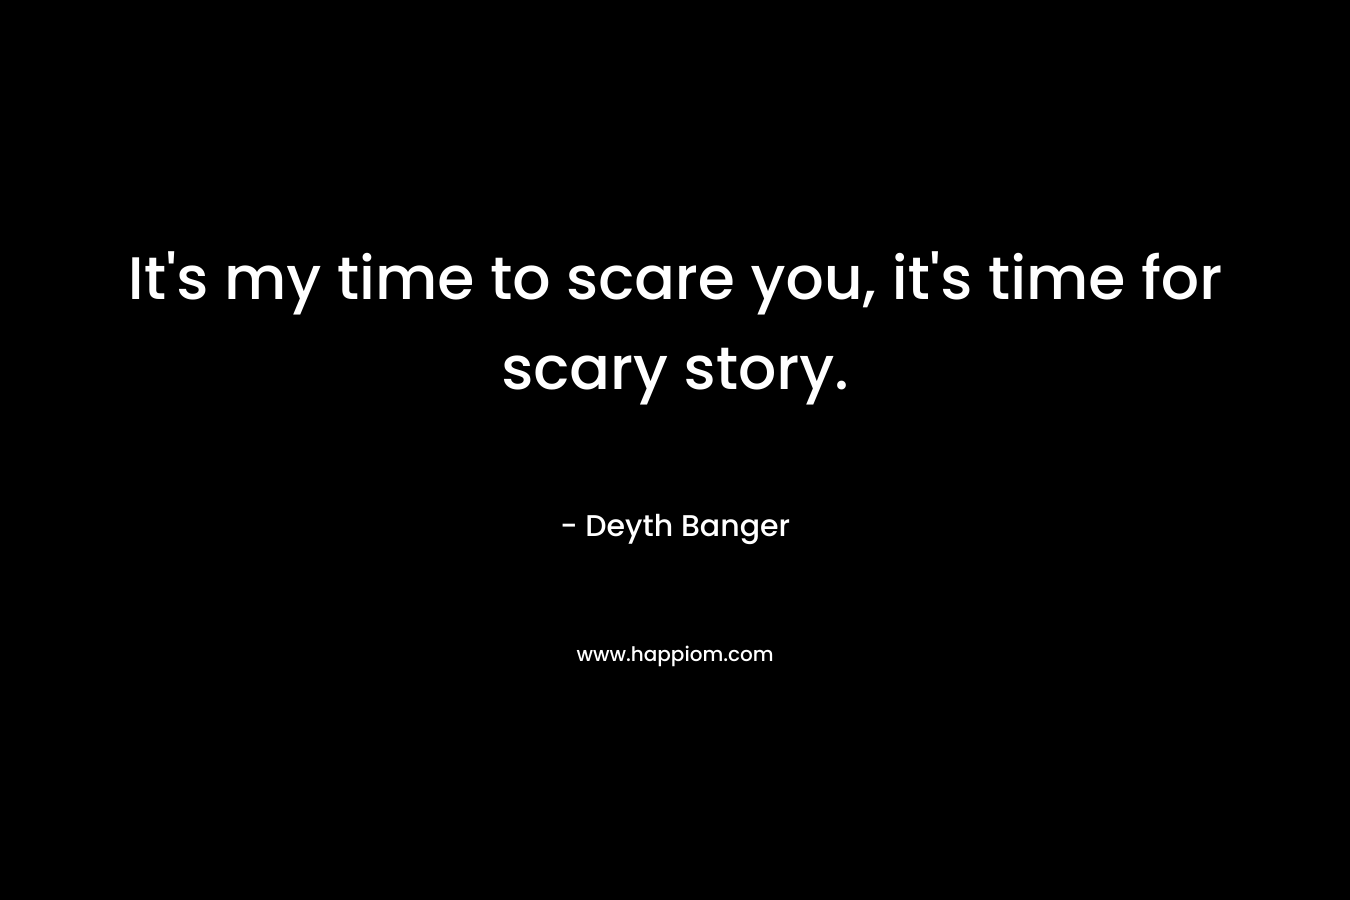 It’s my time to scare you, it’s time for scary story. – Deyth Banger